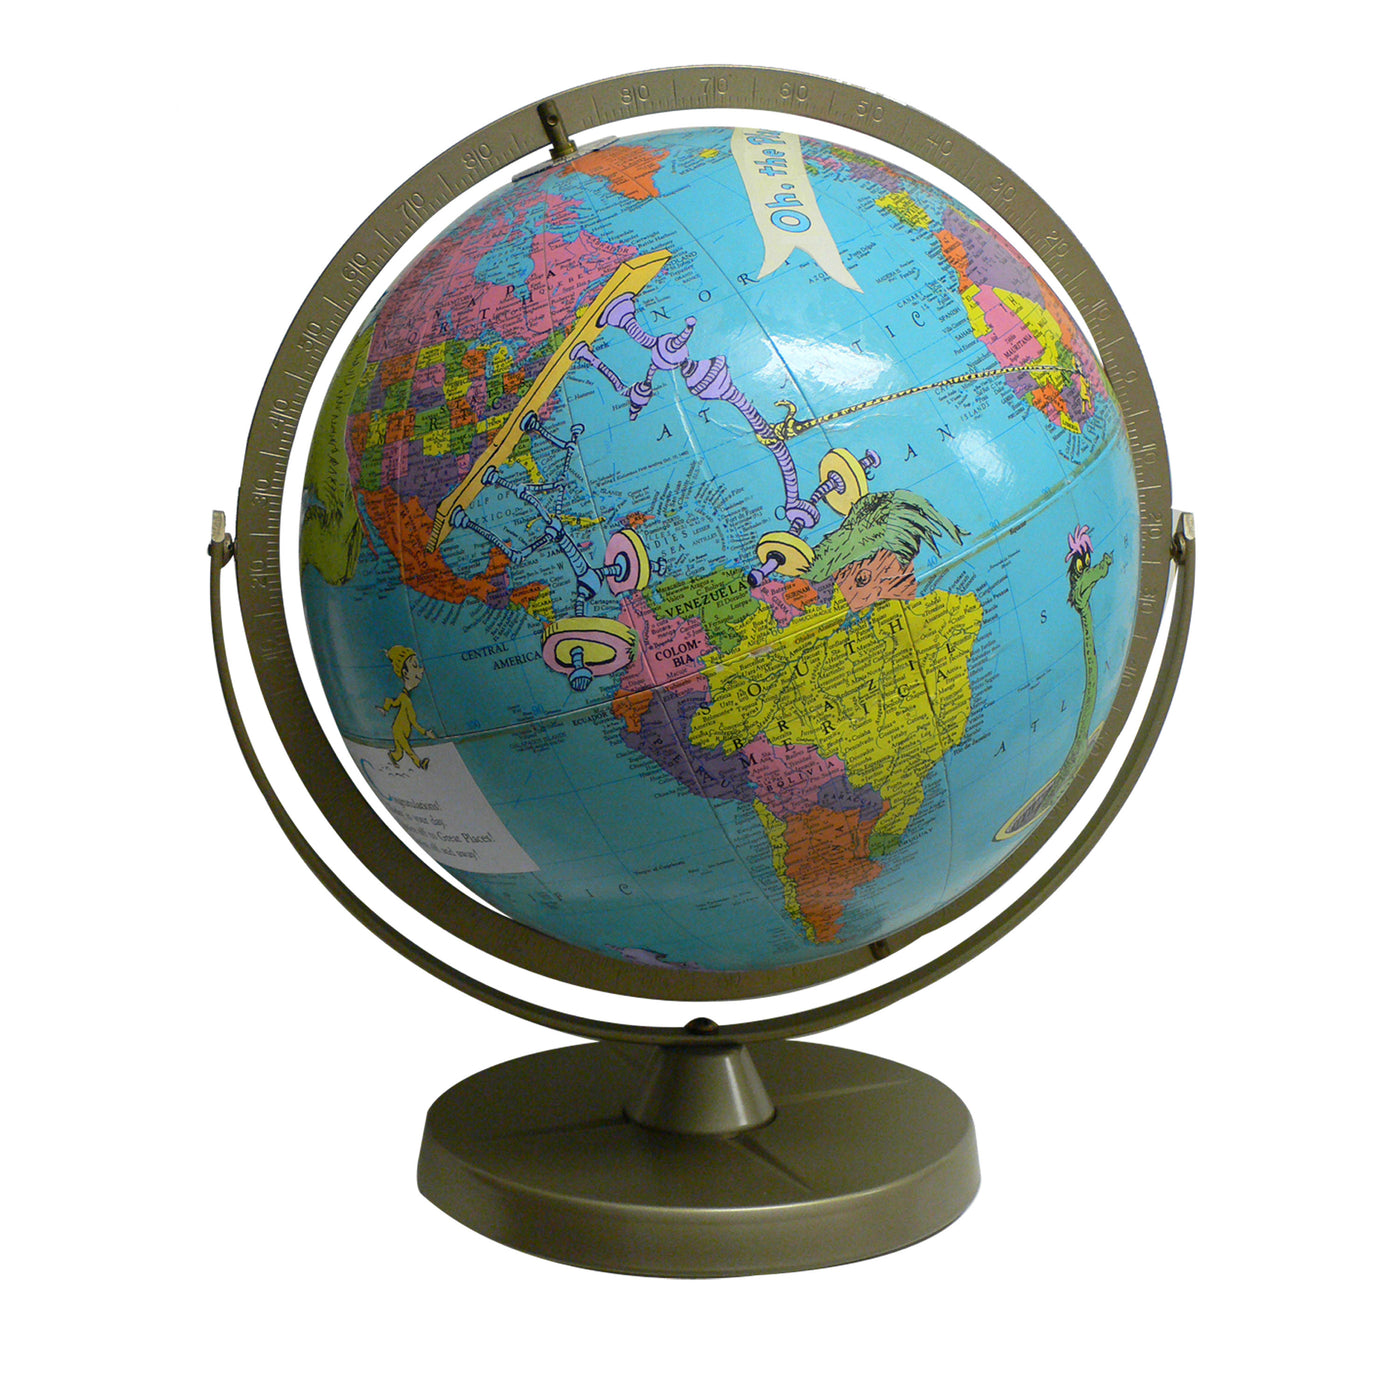 Oh The Places You’ll Go! Vintage Globe Art